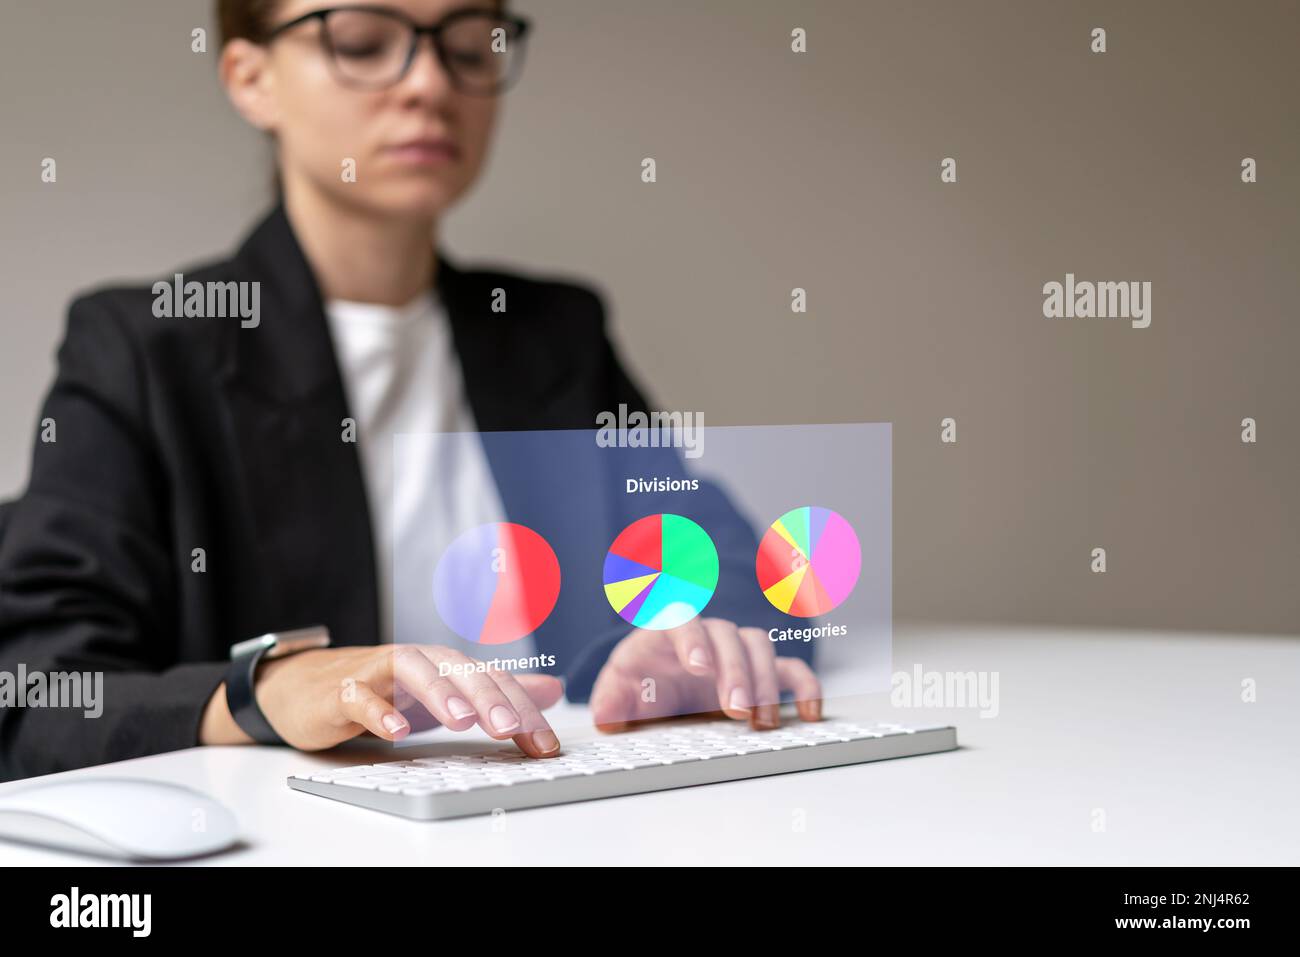 Woman business person working with  virtual diagrams retail kpi, share of business: departments, divisions, categories. Stock Photo